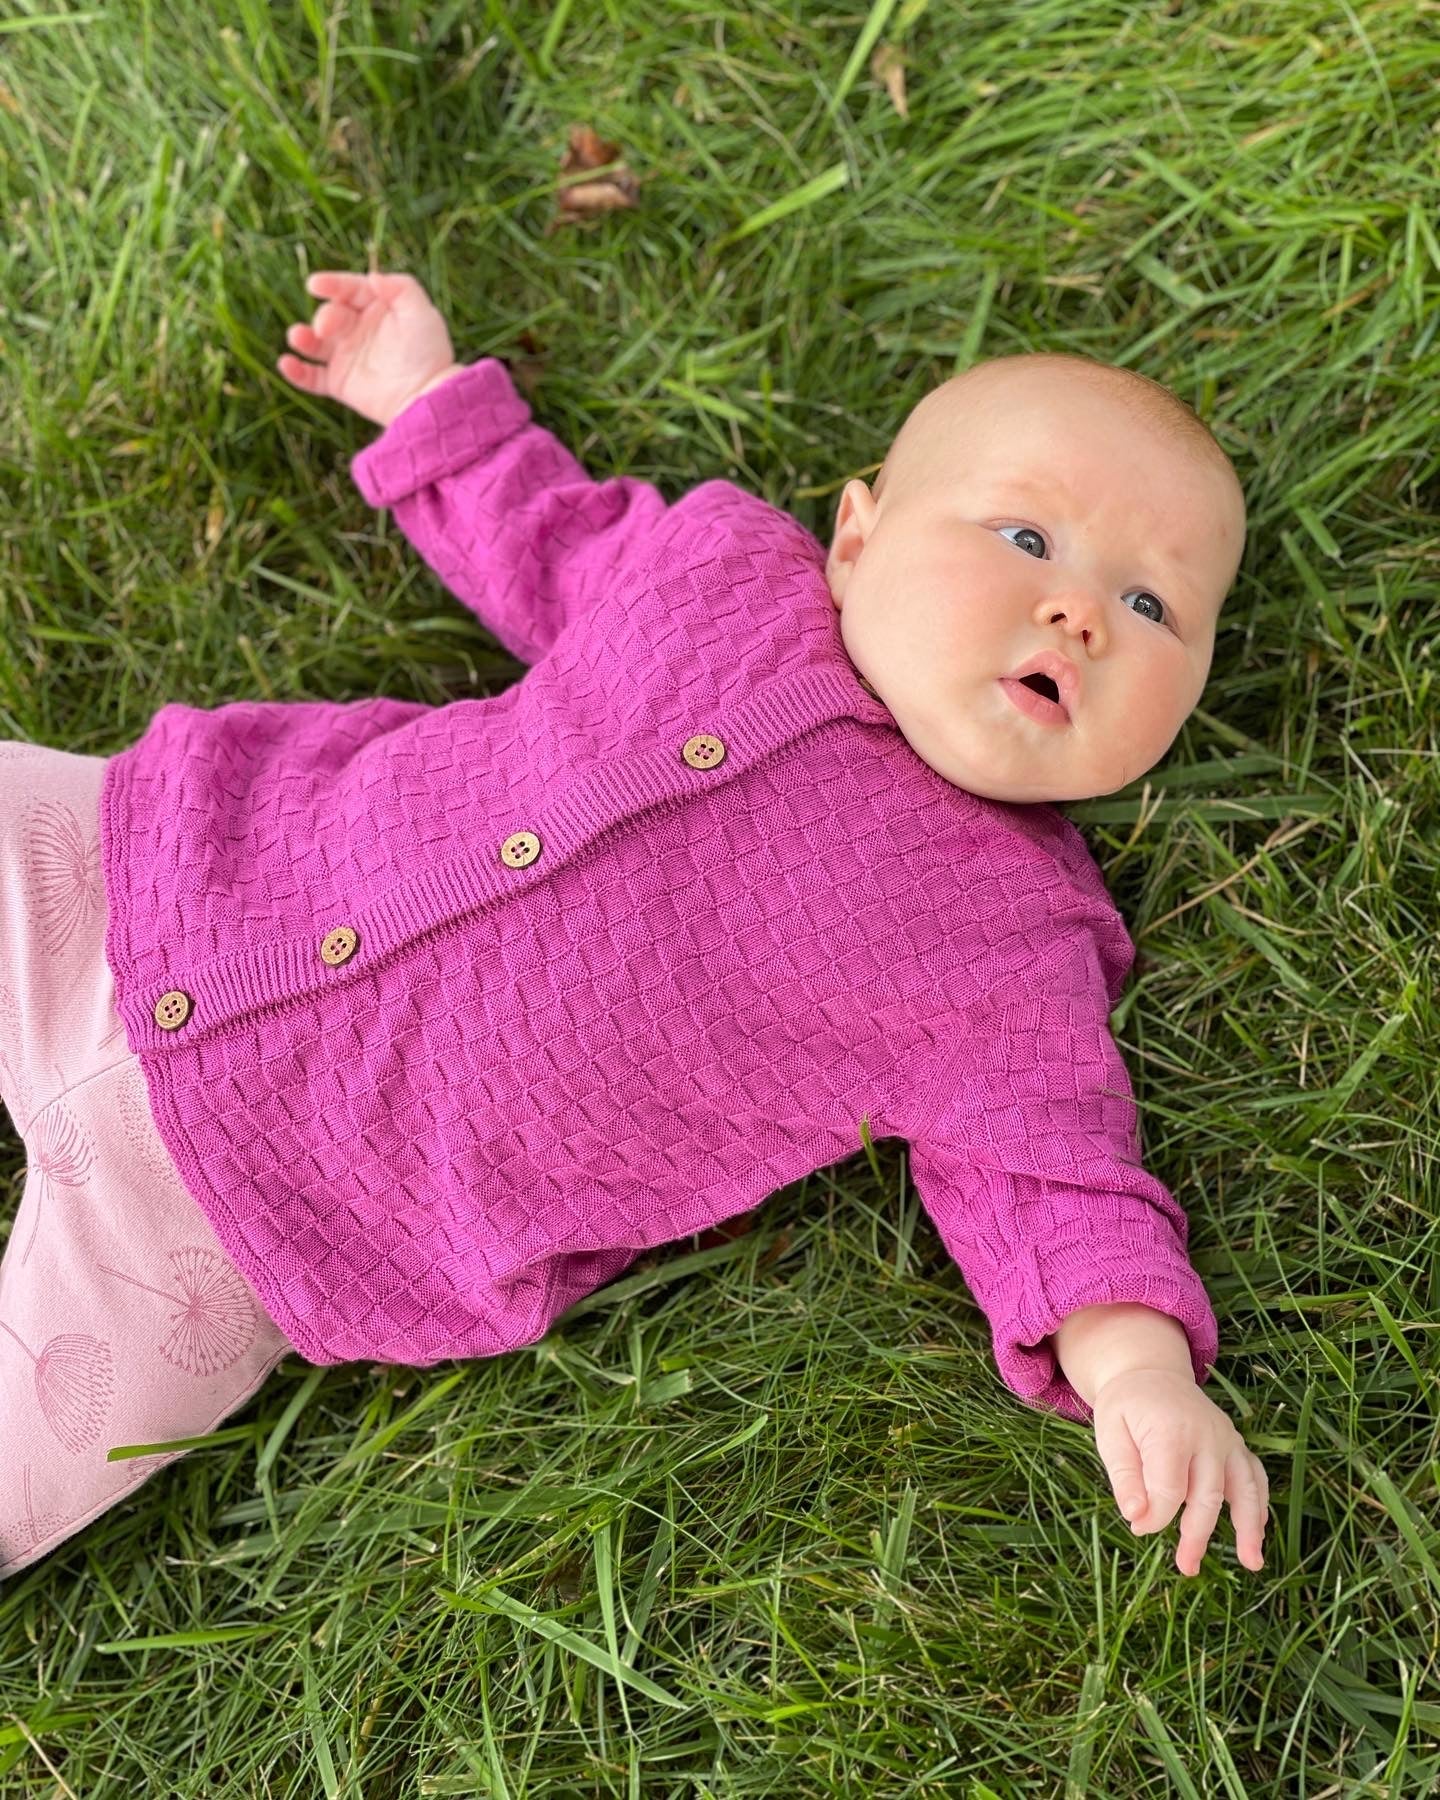 Baby in Bubblegum pink cardigan with wood buttons laying on grass 